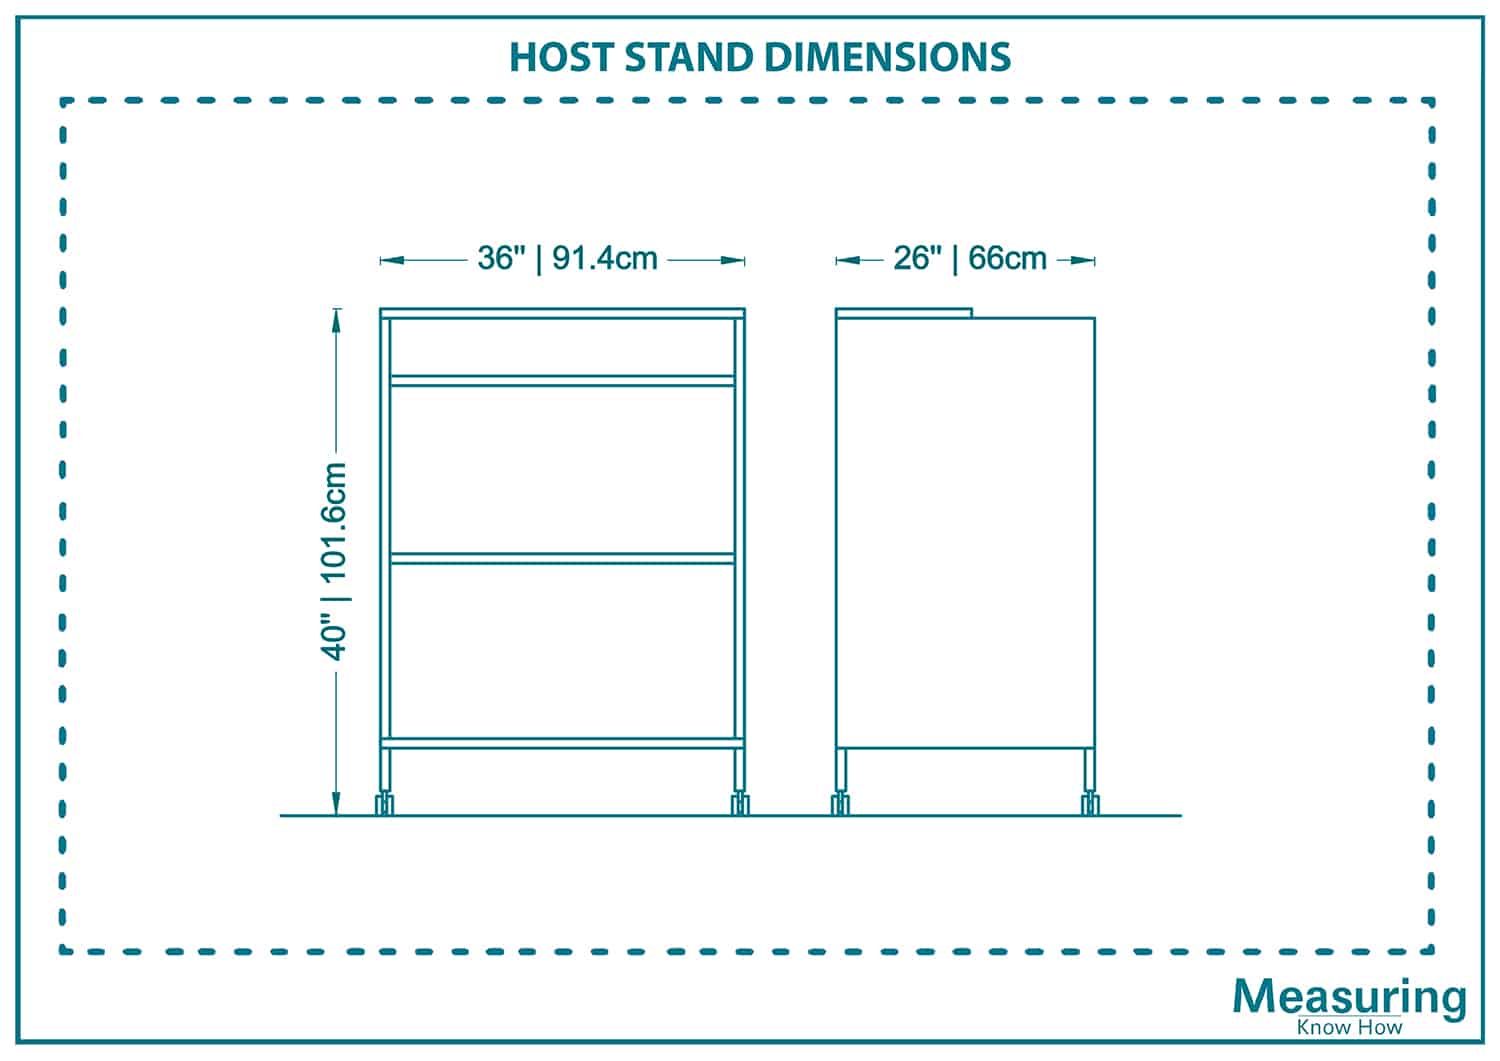 Host stand dimensions